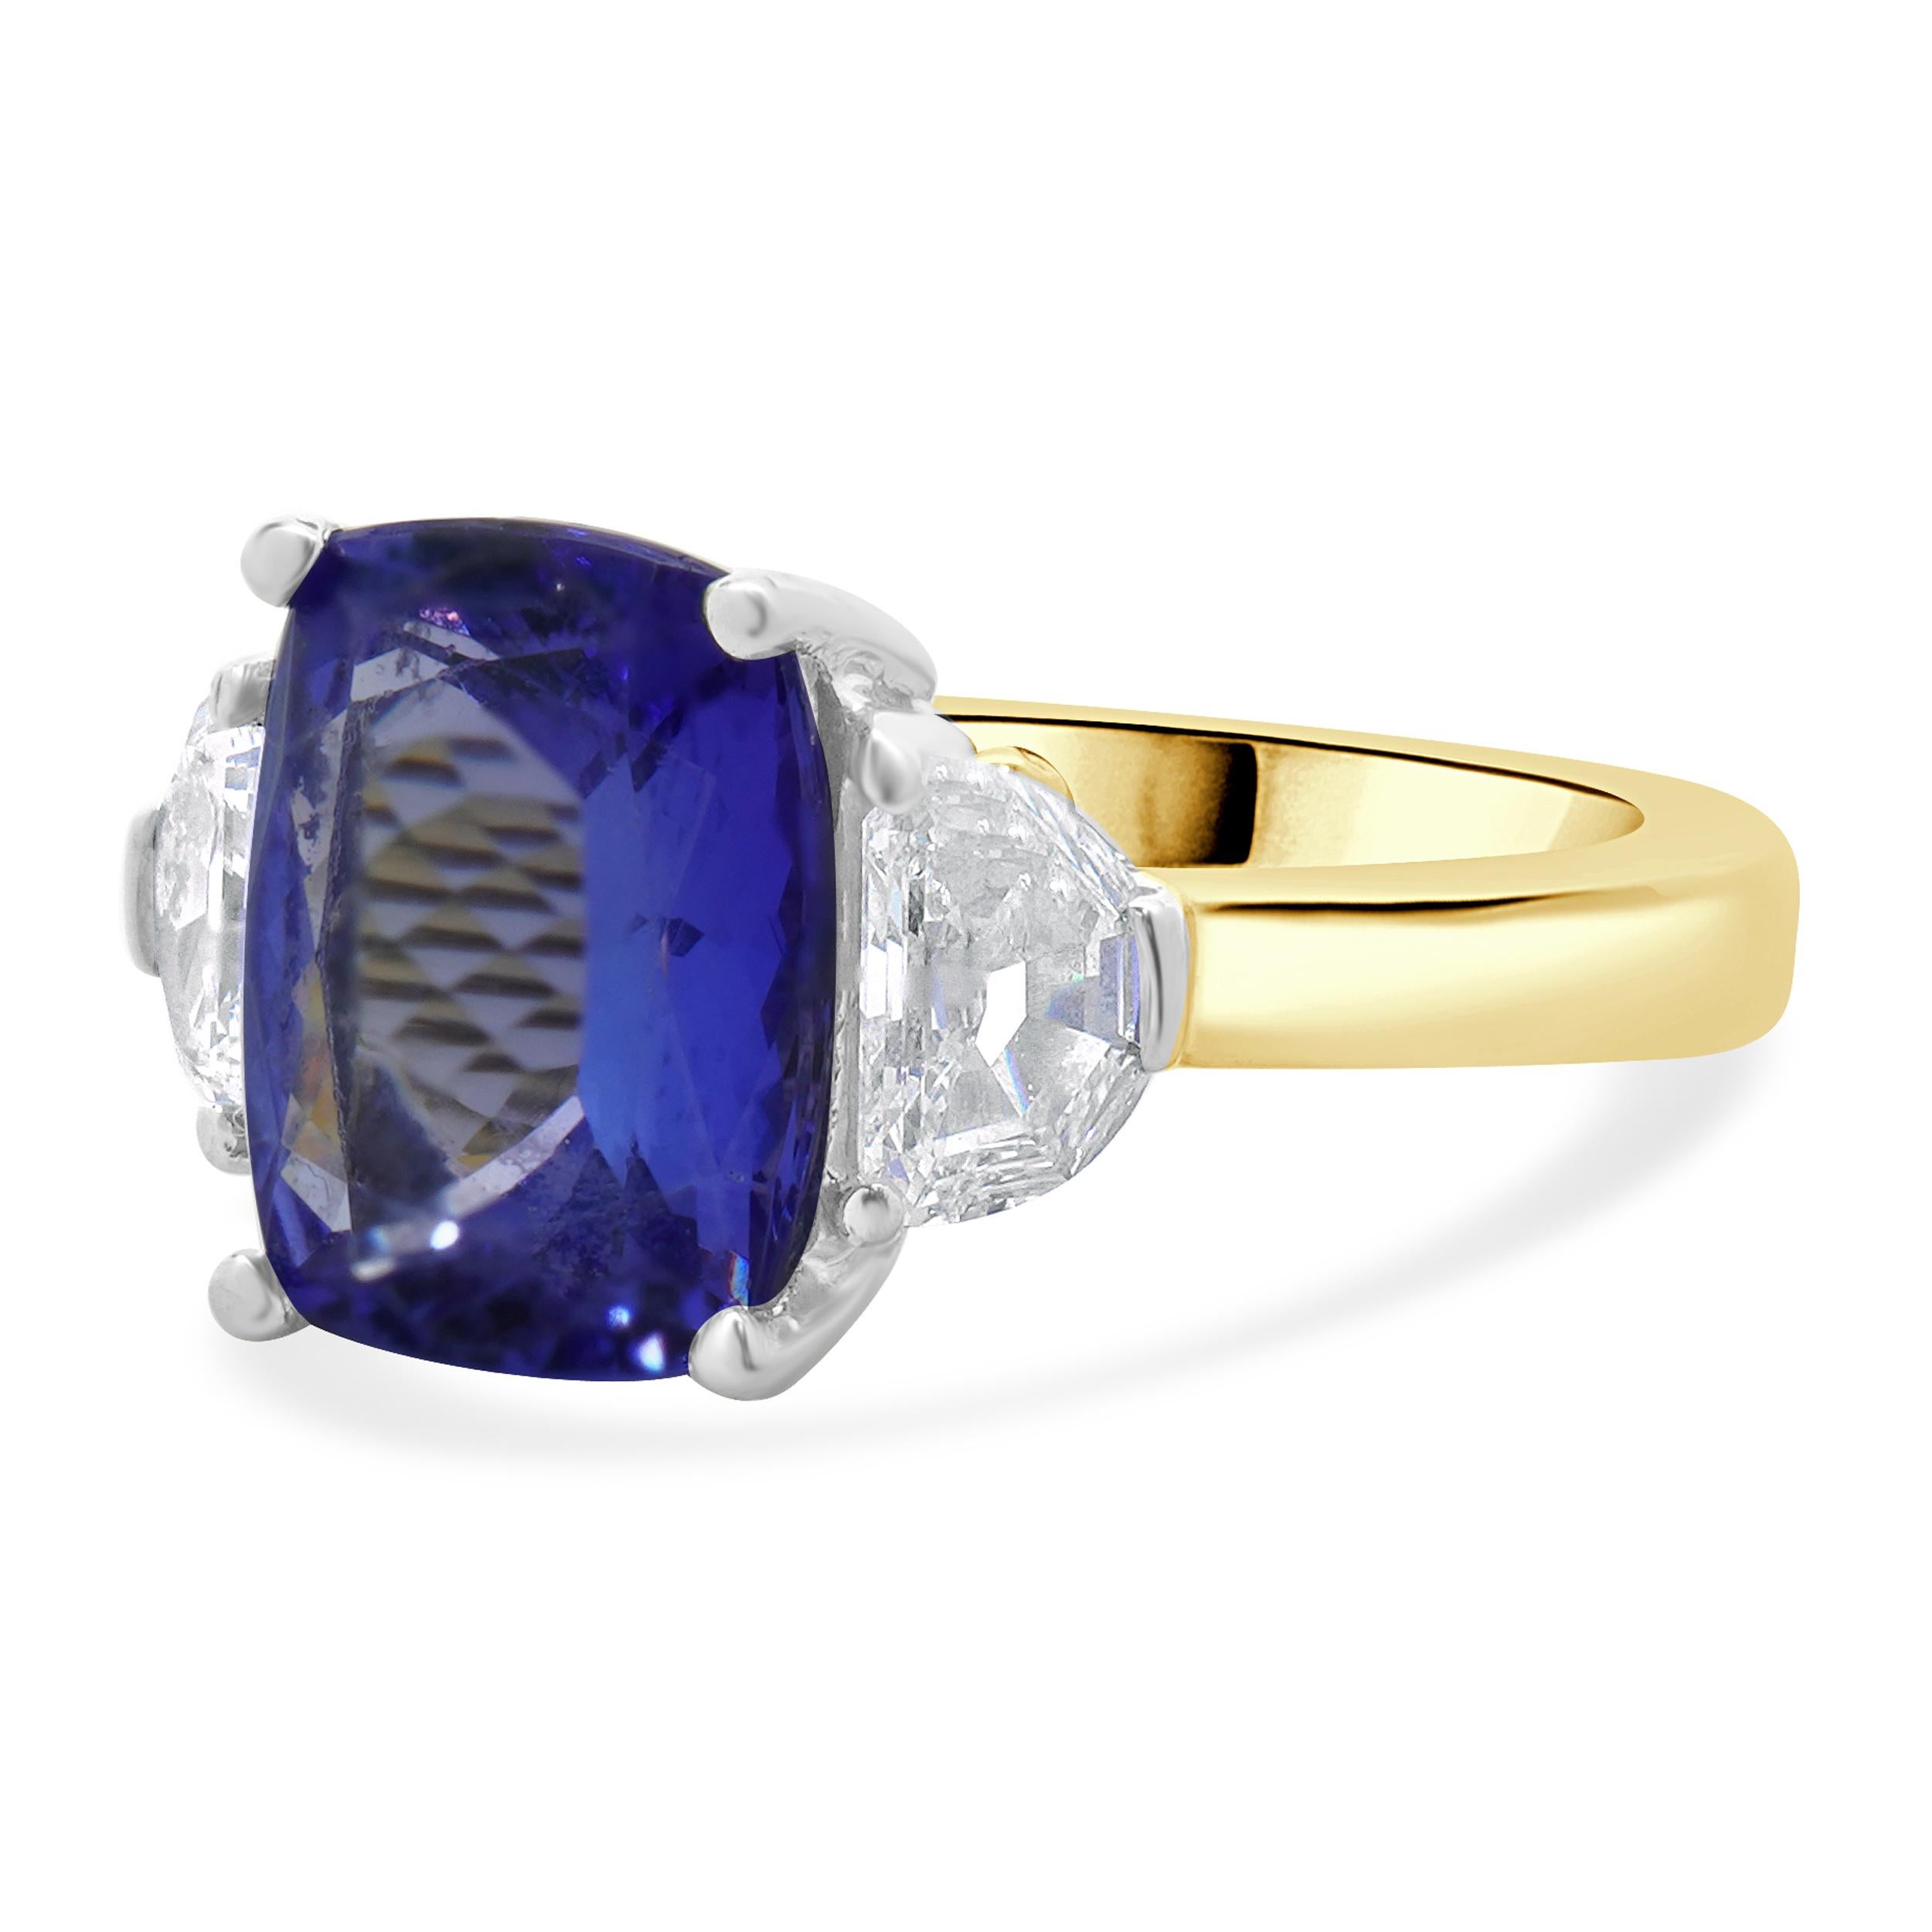 Designer: custom design
Material: 18K yellow & white gold
Diamond: 2 half moon cut = 2.00cttw
Color: H
Clarity: SI1-2
Tanzanite: 1 cushion cut = 4.04ct
Dimensions: ring top measures 11mm wide
Ring Size: 4.5 with sizing beads (please allow two extra